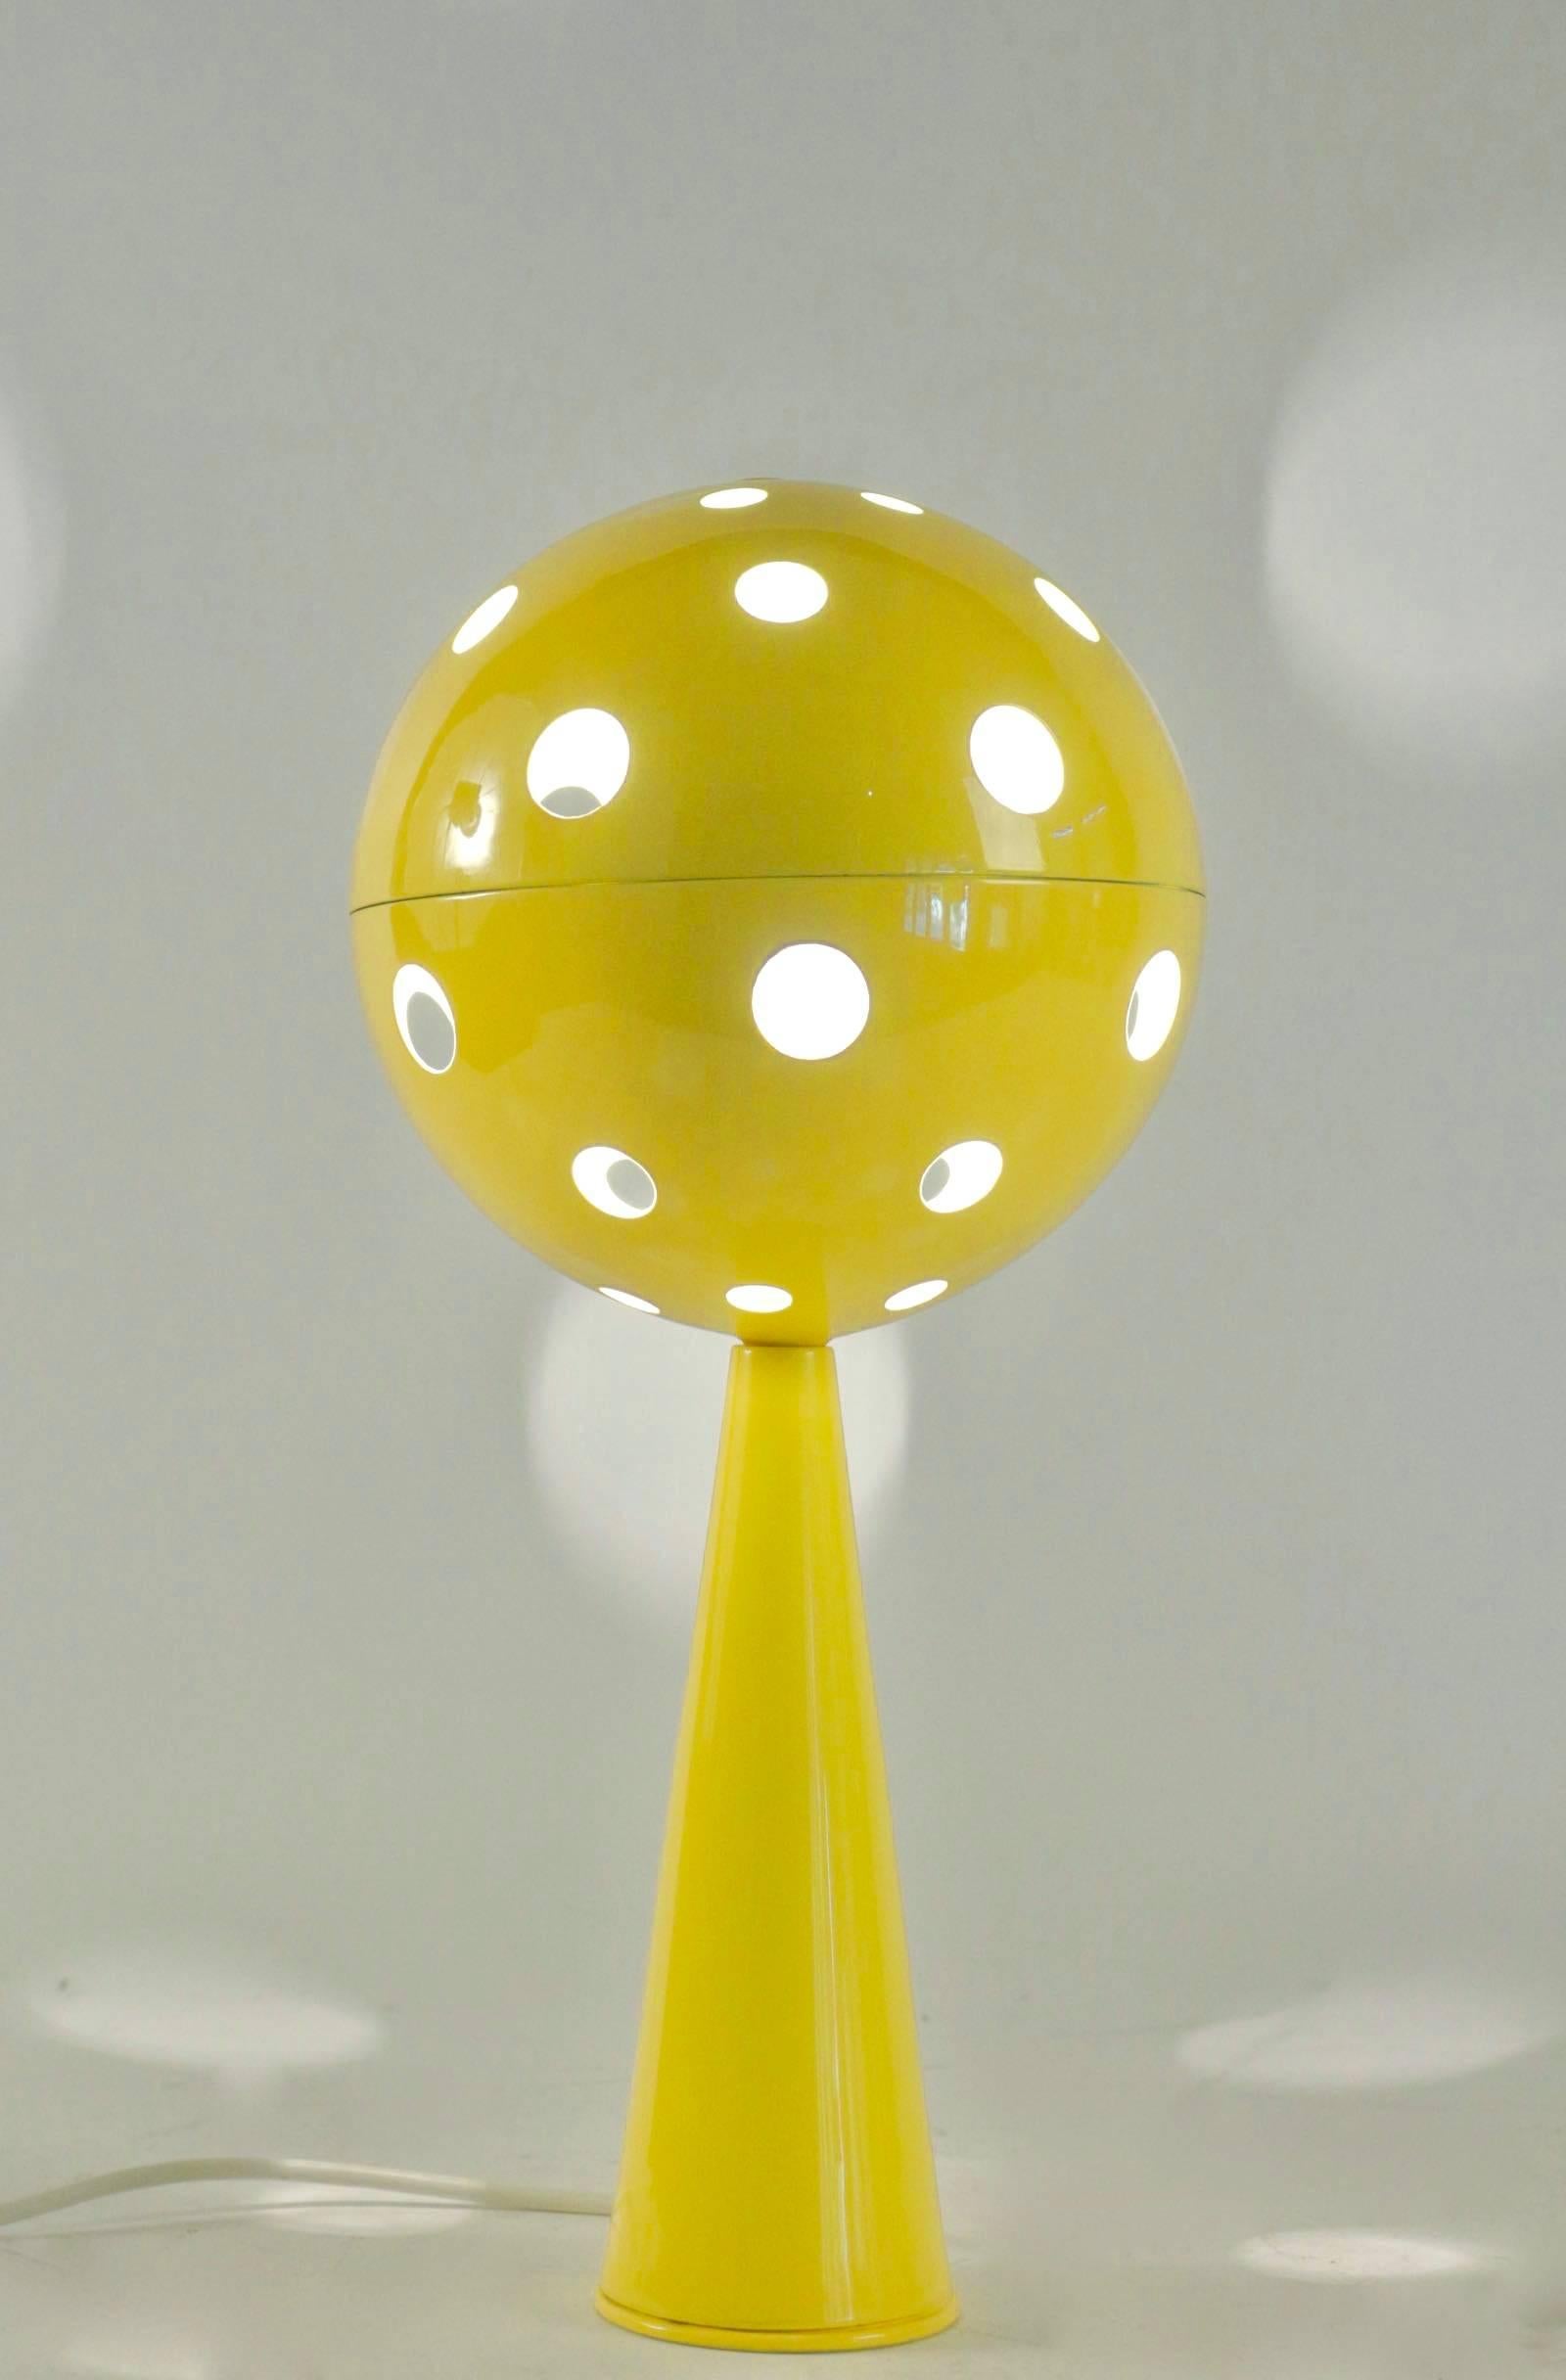 Rare table lamp model Planétaire / Planetary by Sabine Charoy.

Yellow lacquered steel. The conical foot lamp supports a large perforated ball which contains the bulb. The light shines through the holes of diffentes sizes.

The lamps was